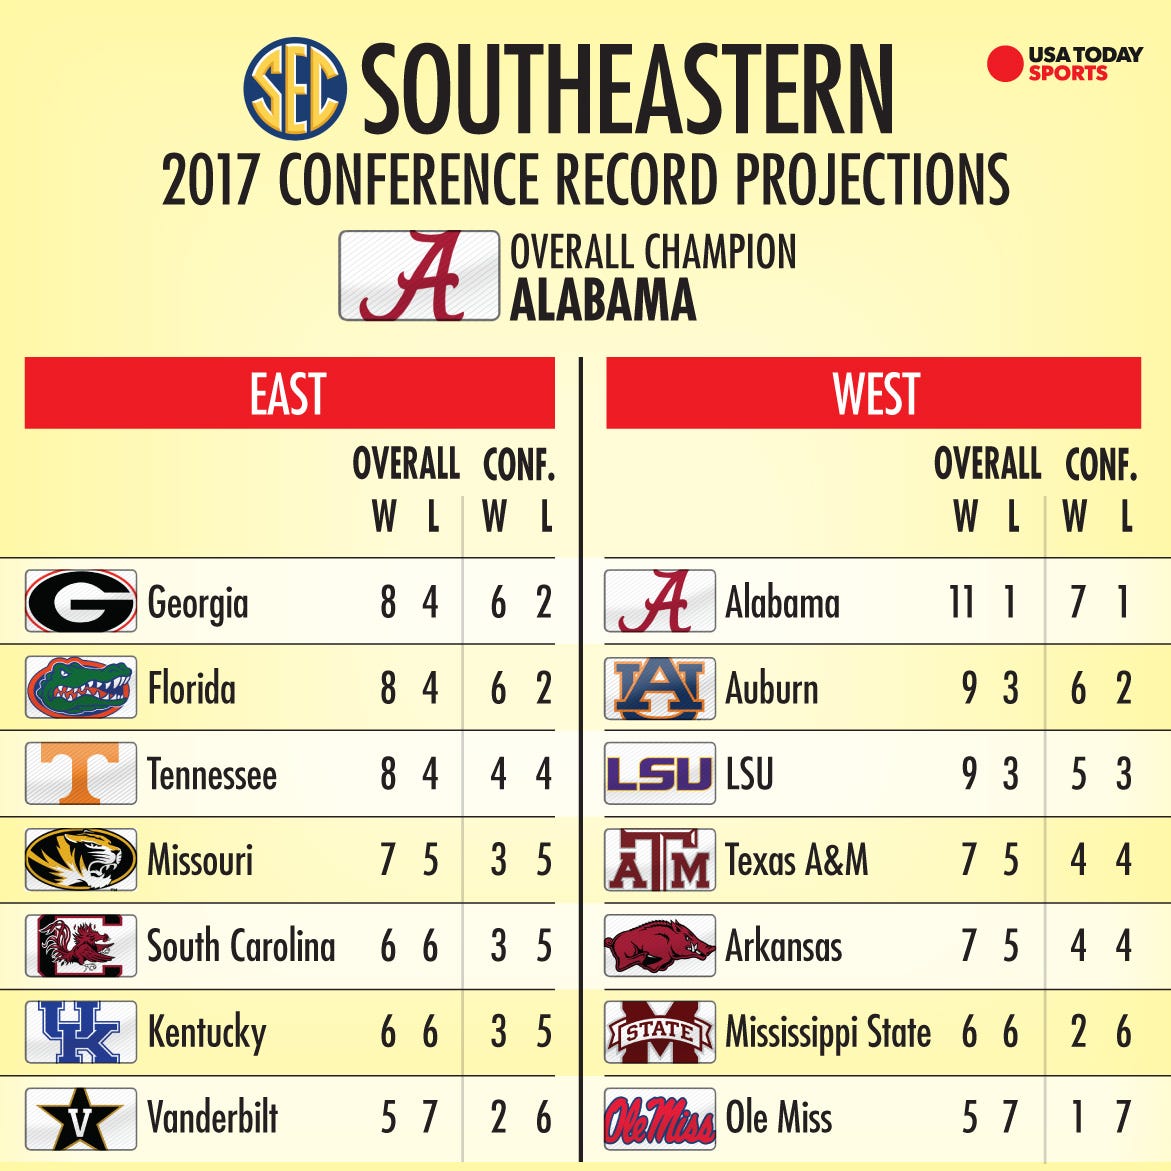 College Football 2017 With Gap Between Alabama And Rest